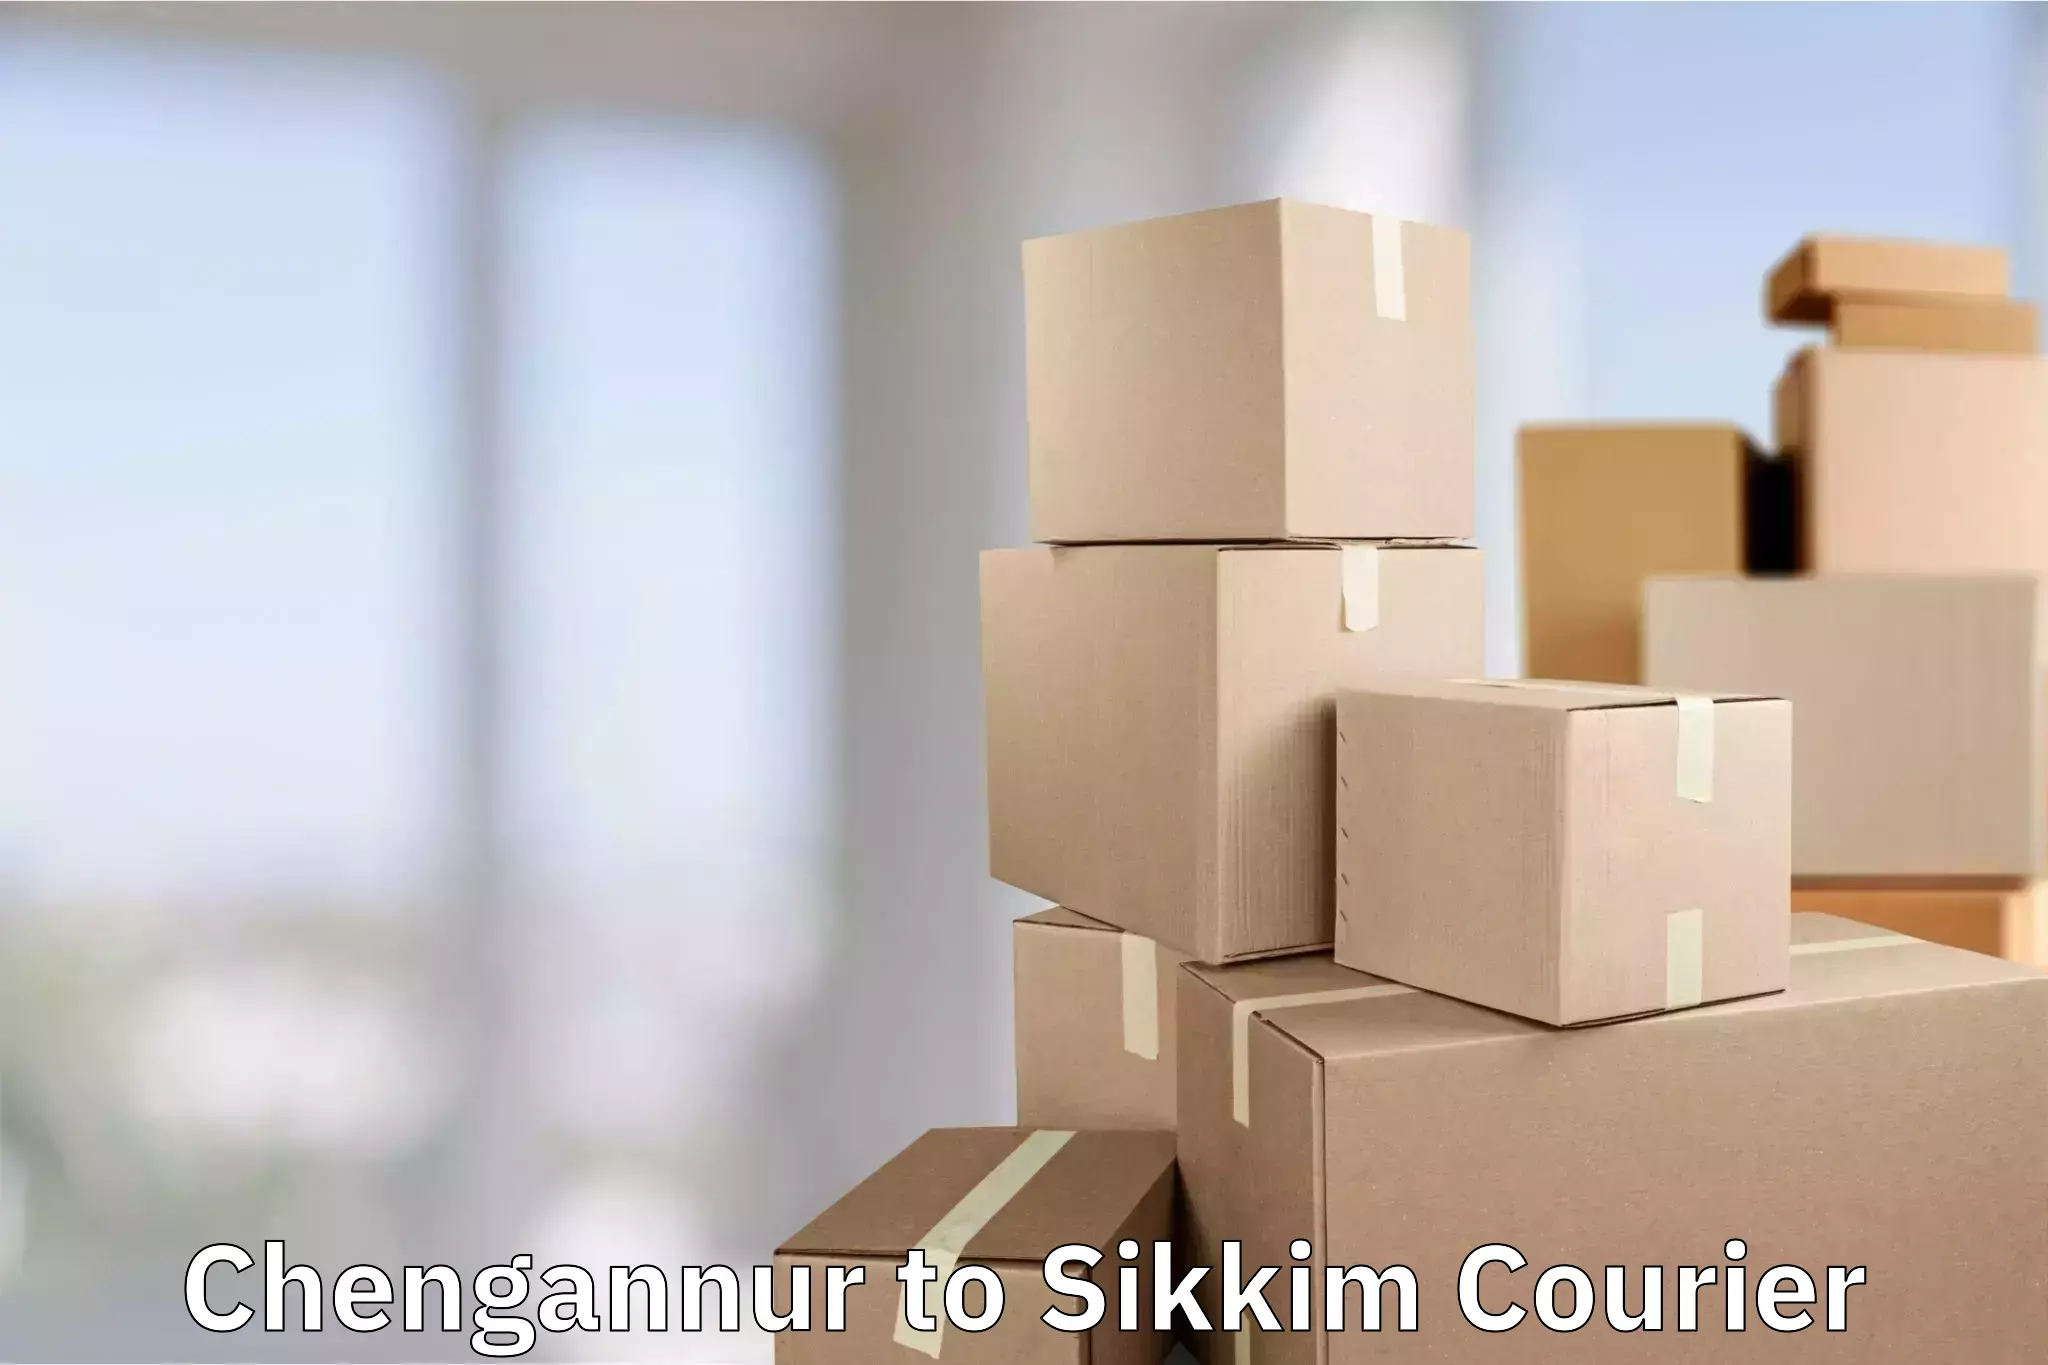 Luggage delivery app Chengannur to East Sikkim